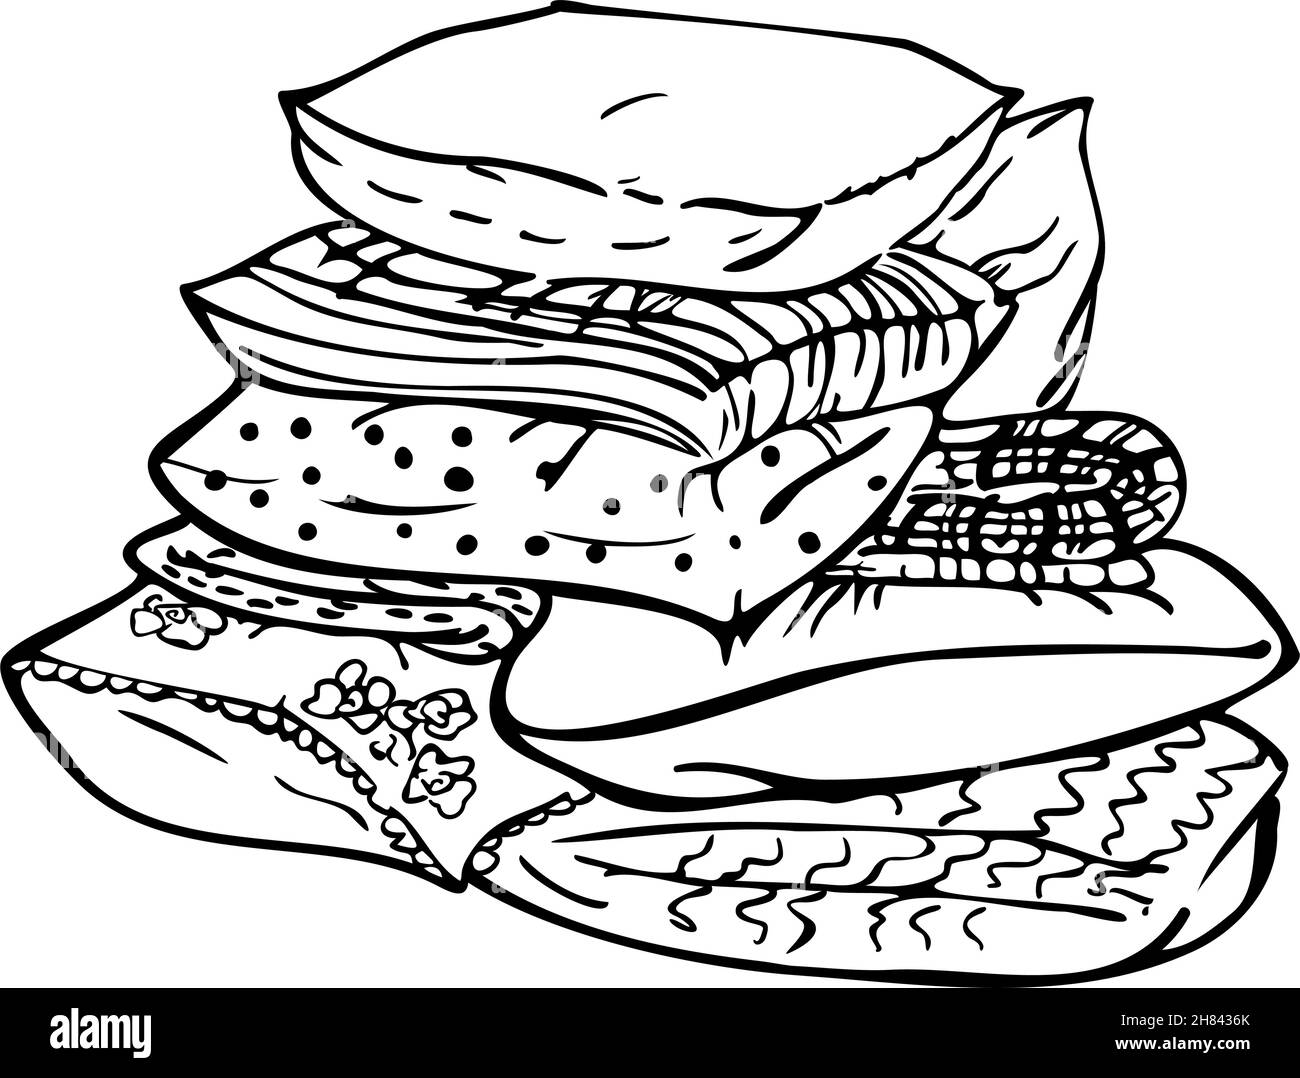 Vector illustration of stack of pillows. Design for coloring book. Stock Vector